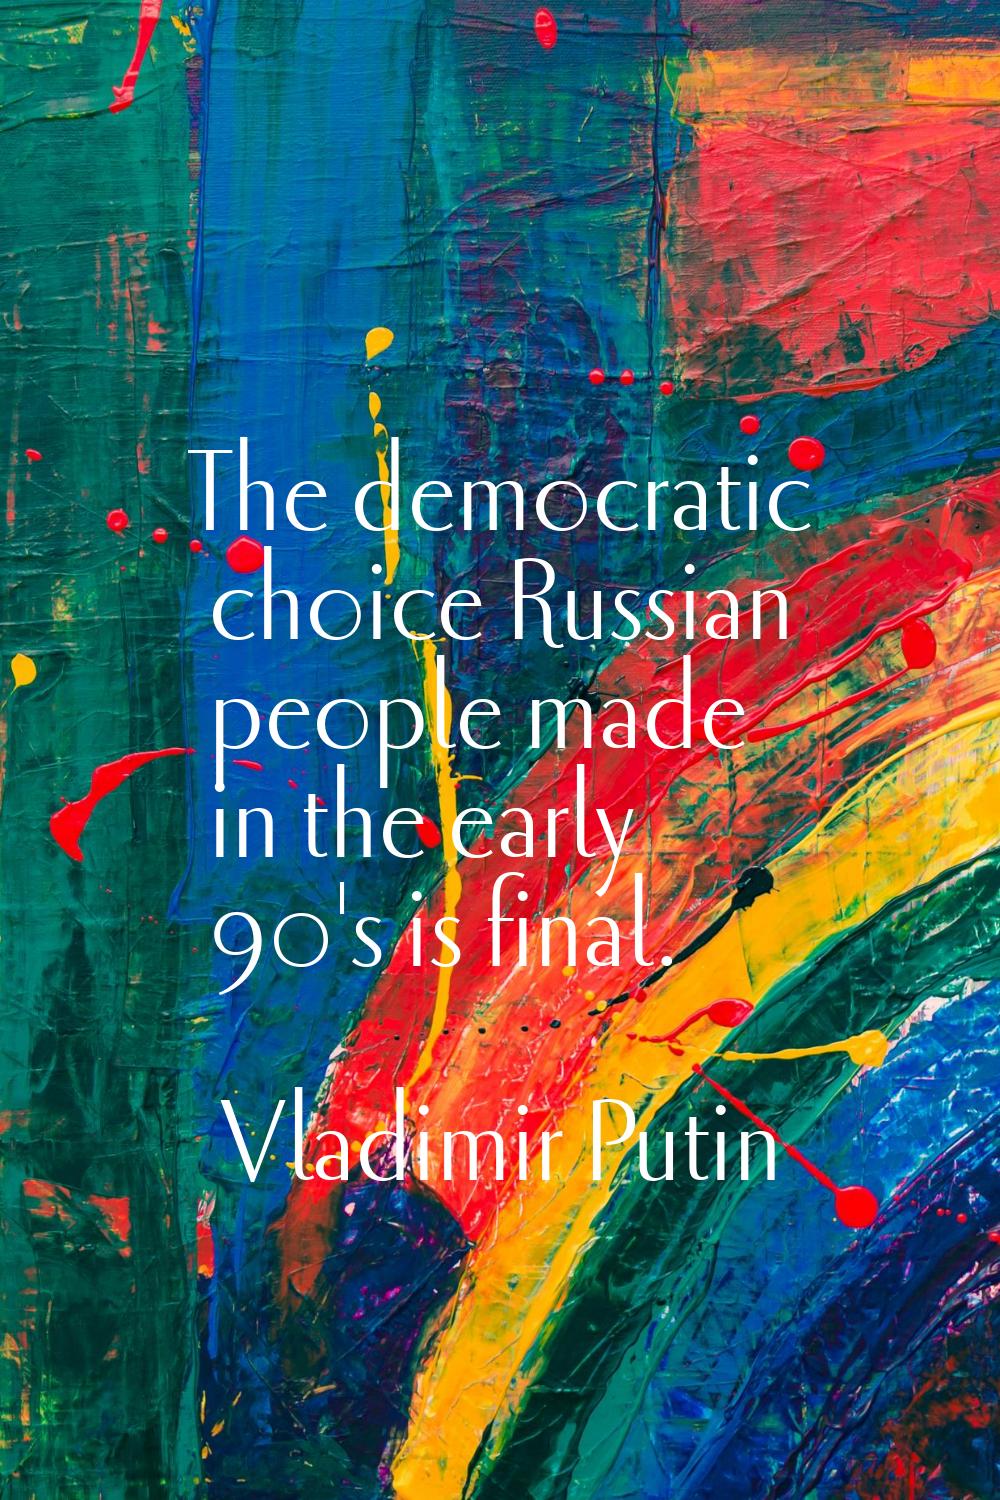 The democratic choice Russian people made in the early 90's is final.